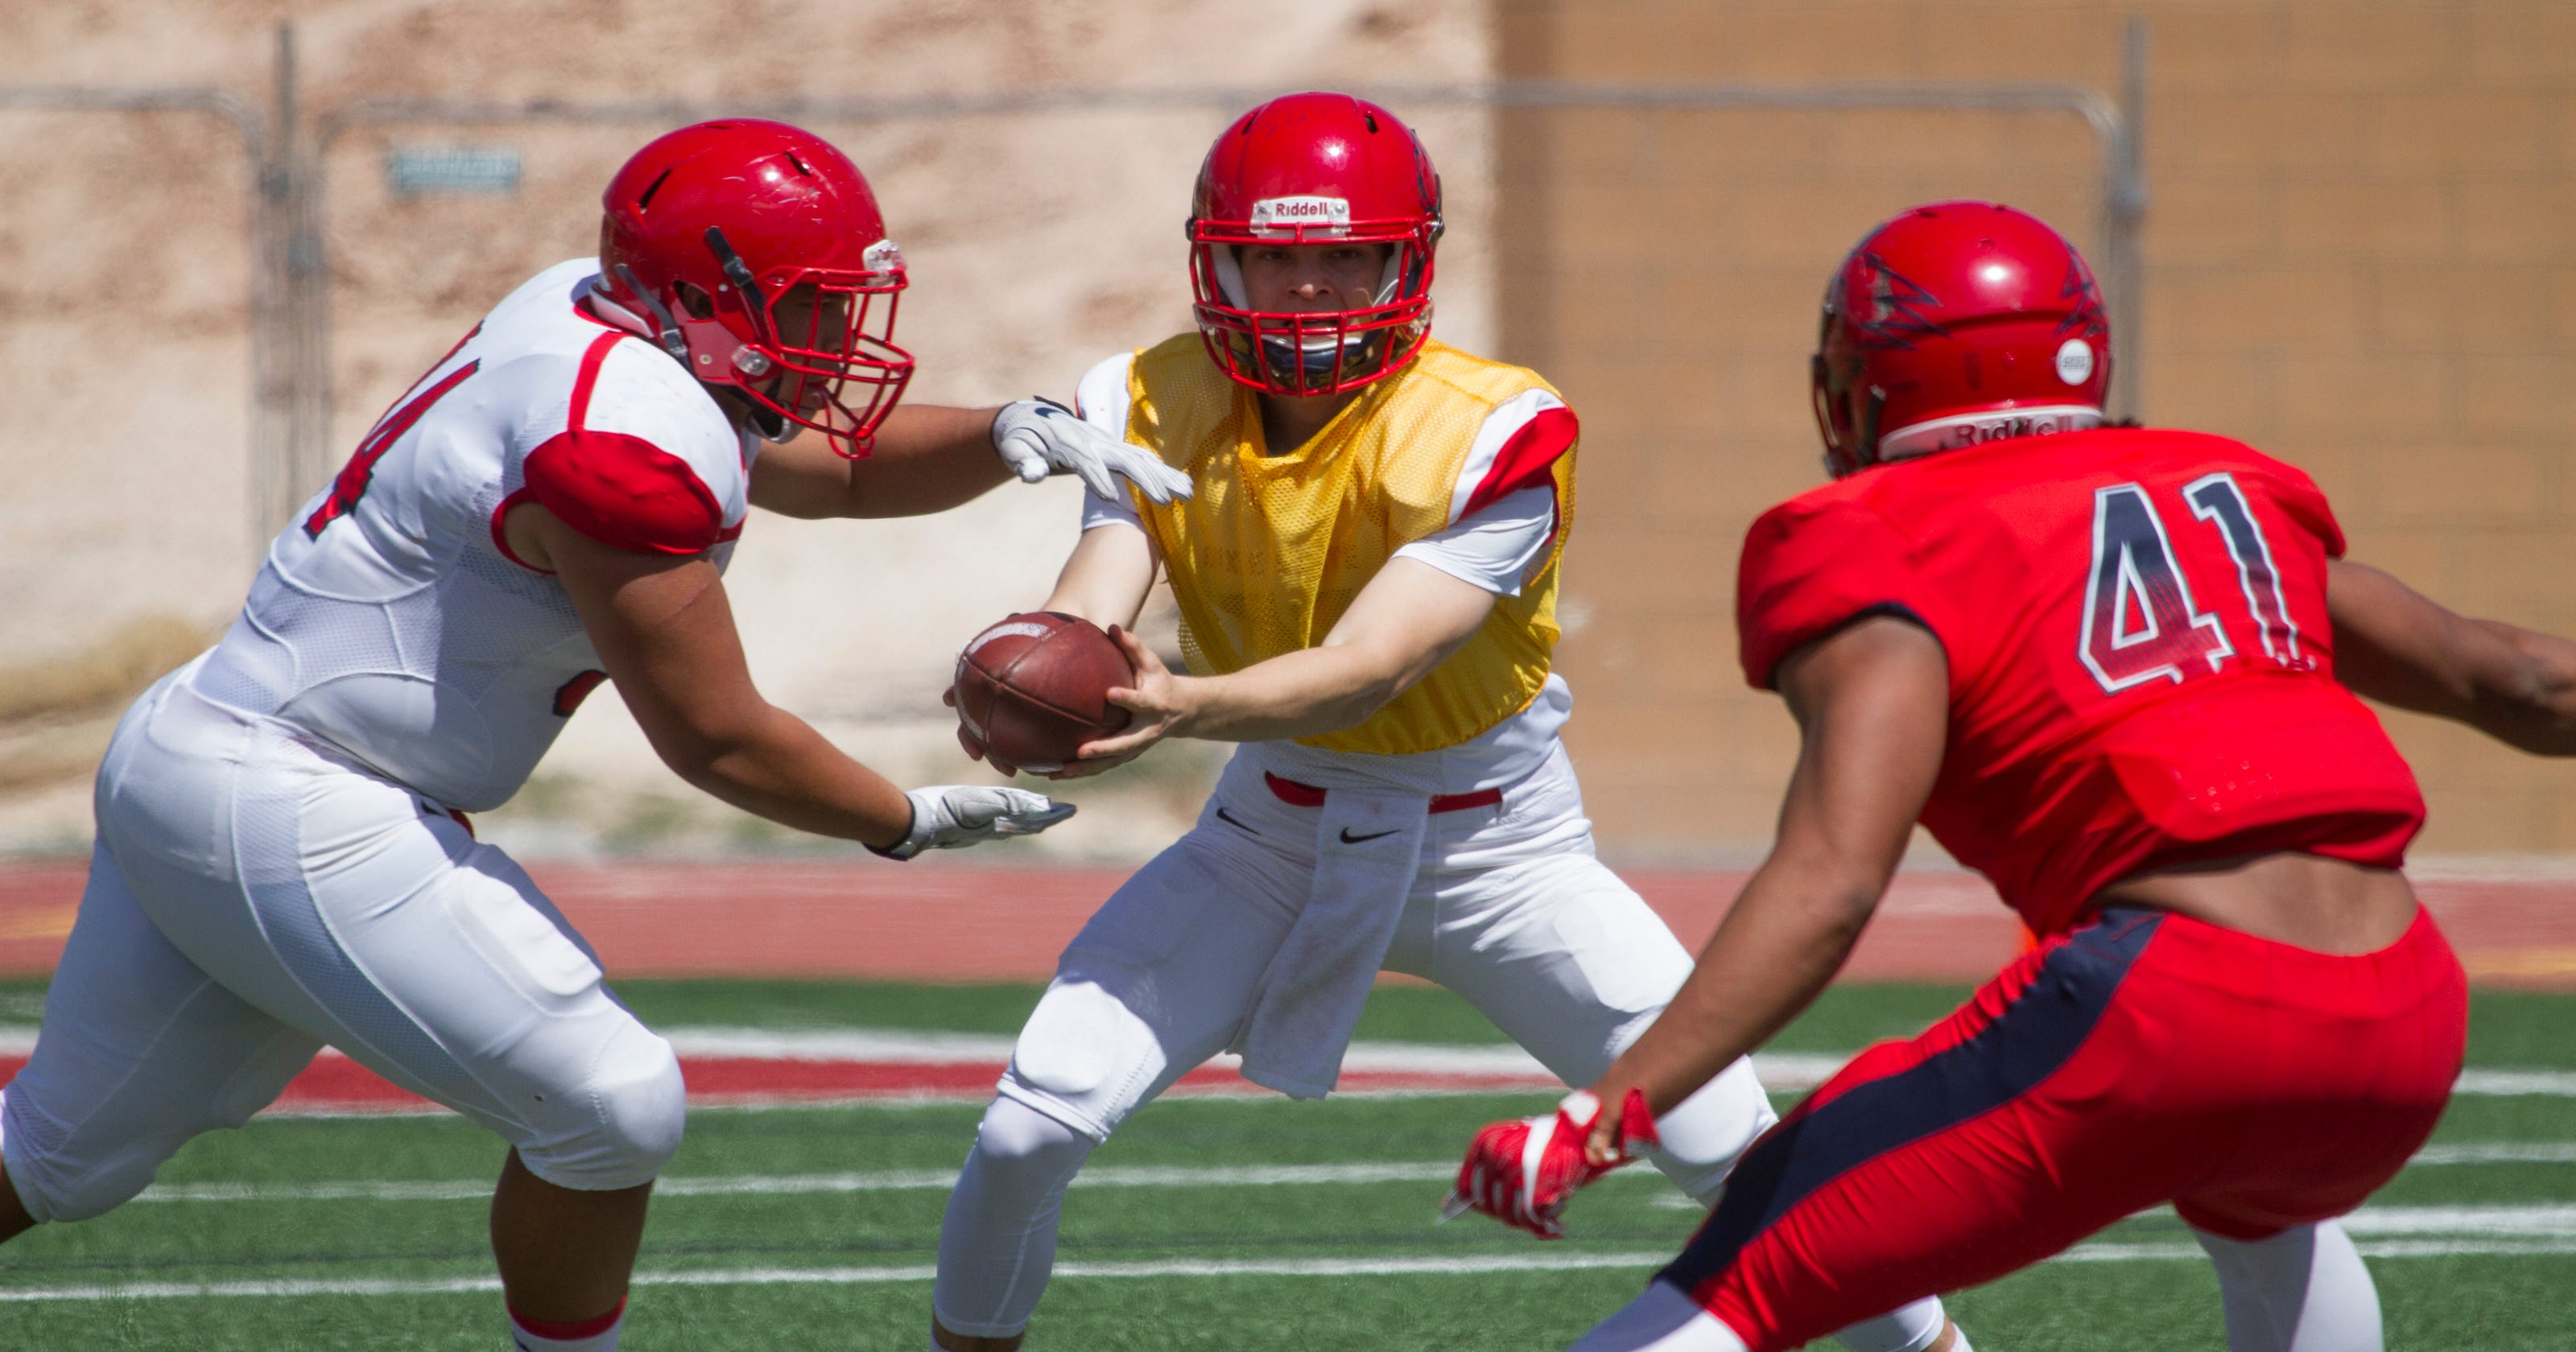 DSU football gets preseason favorite right out of the gate